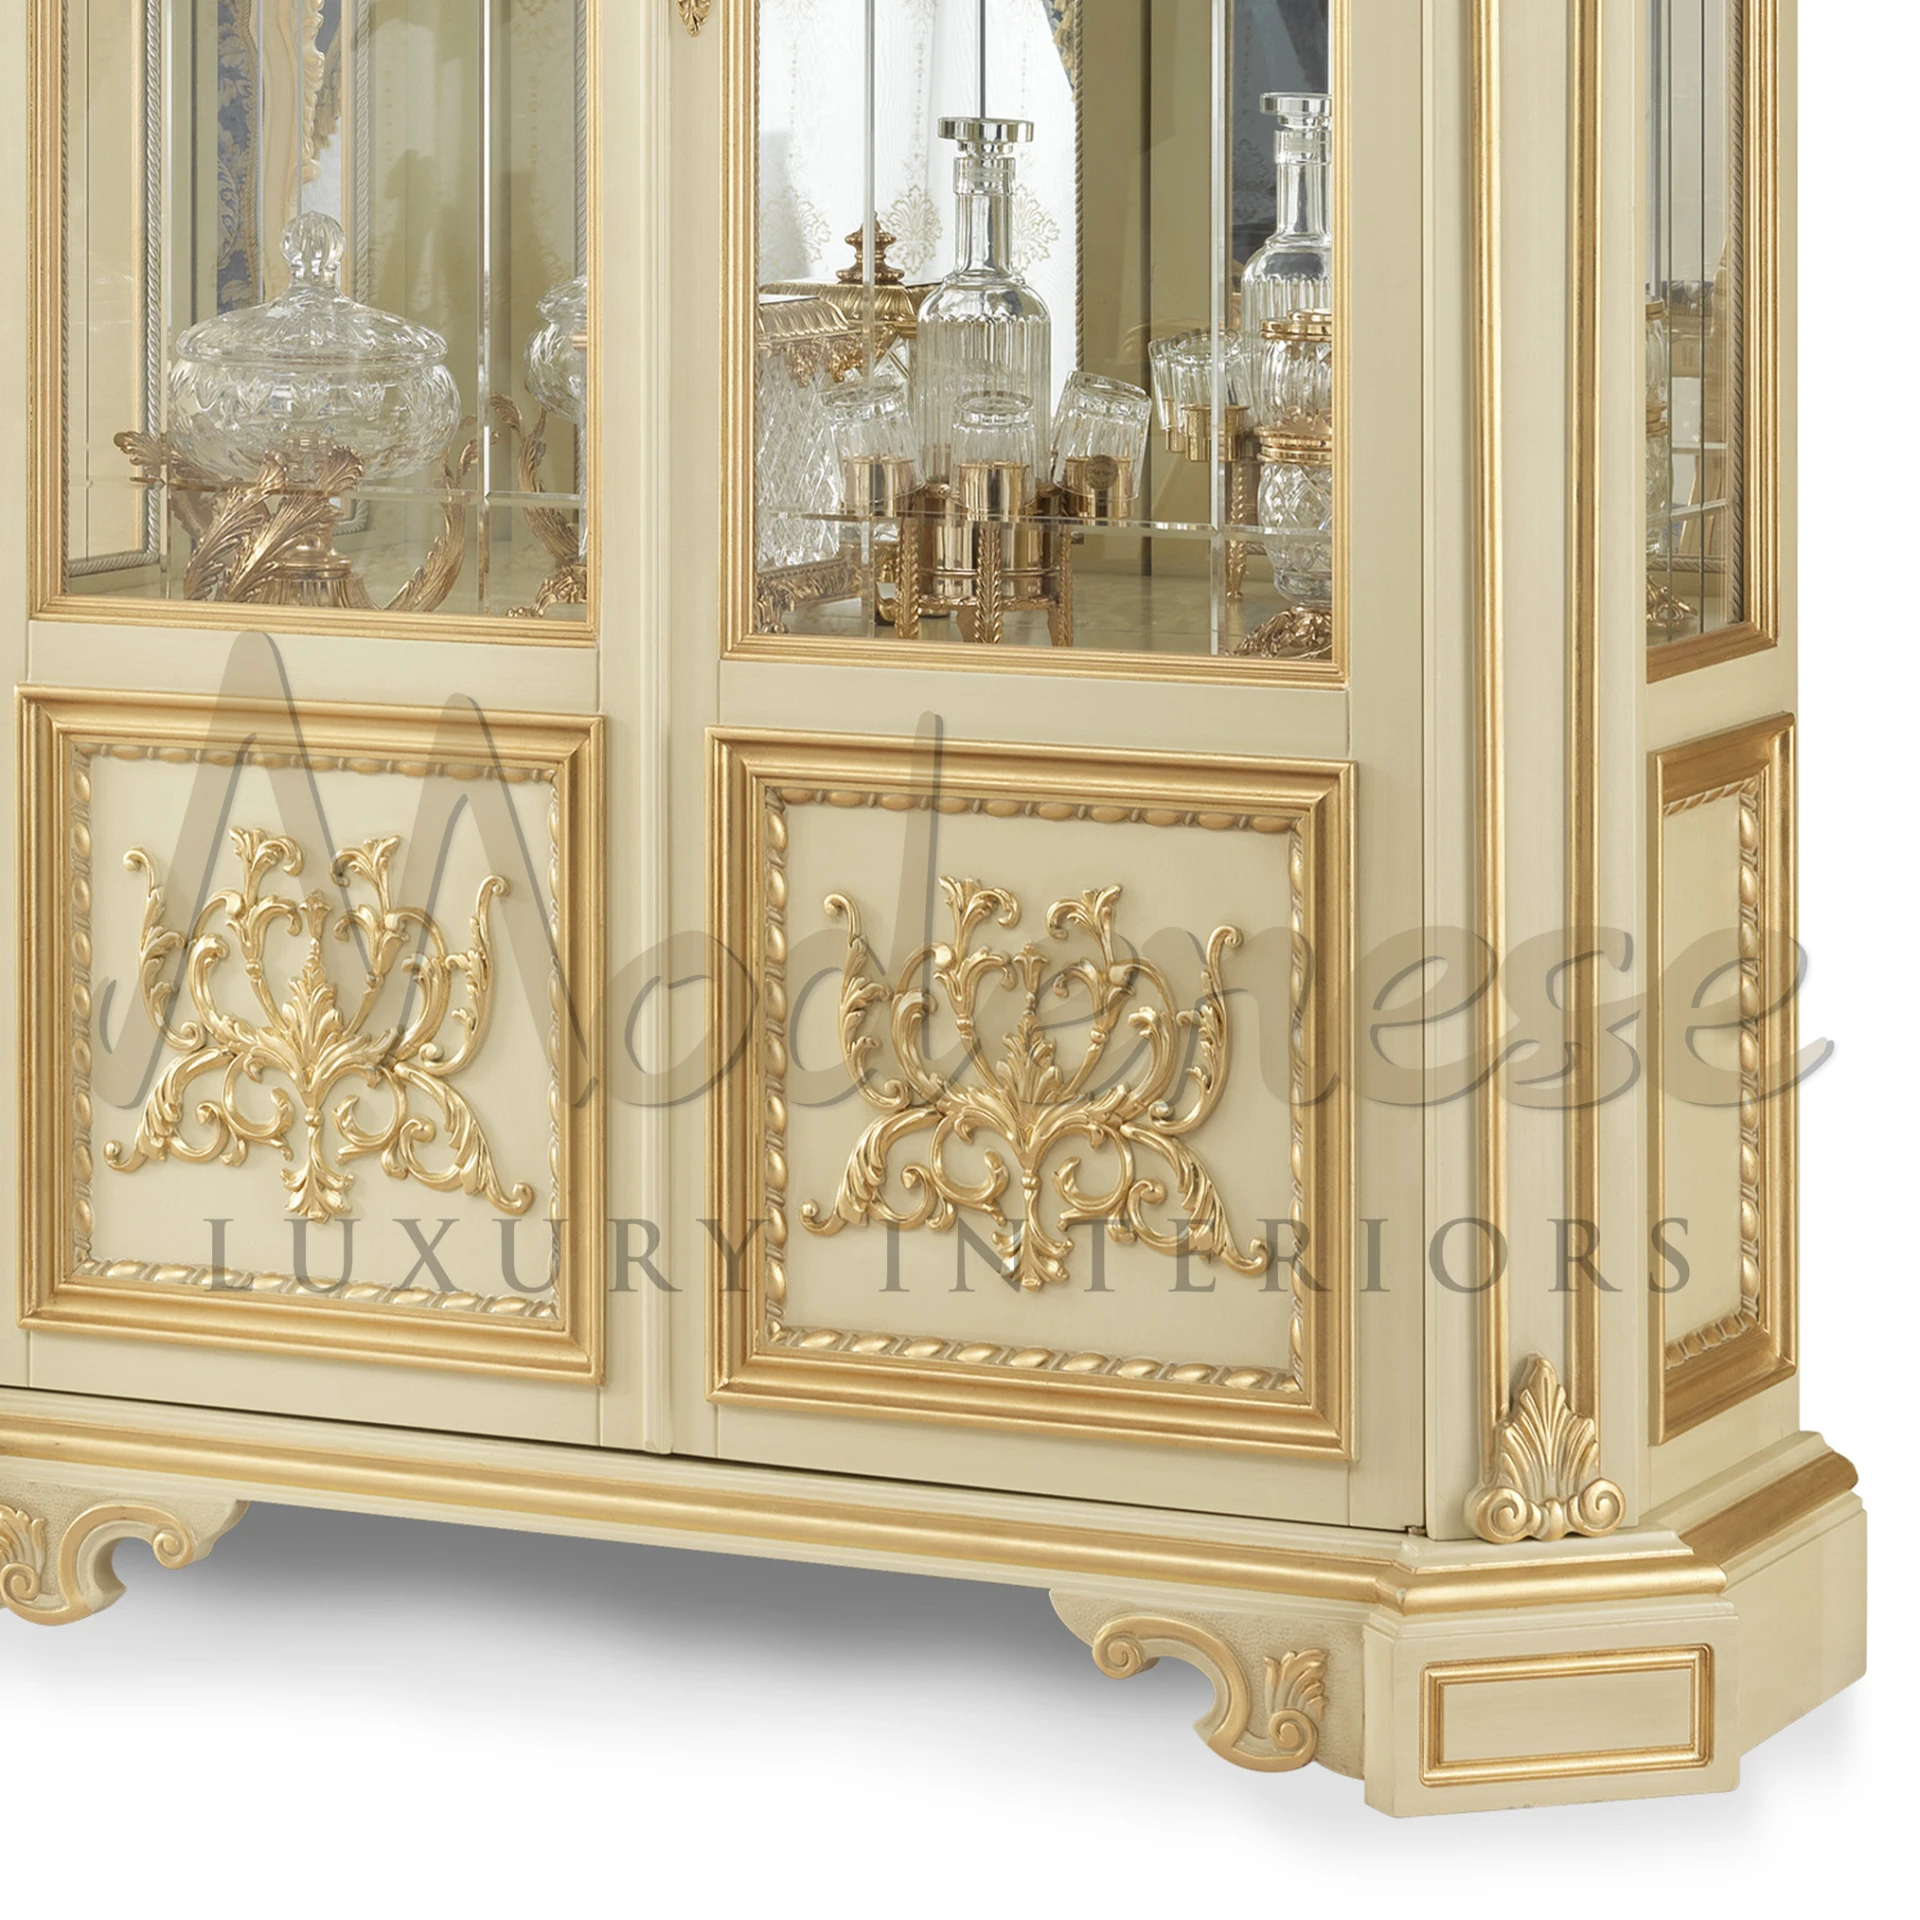 a close up view of the luxury ivory cabinet bottom showing fancy floral design